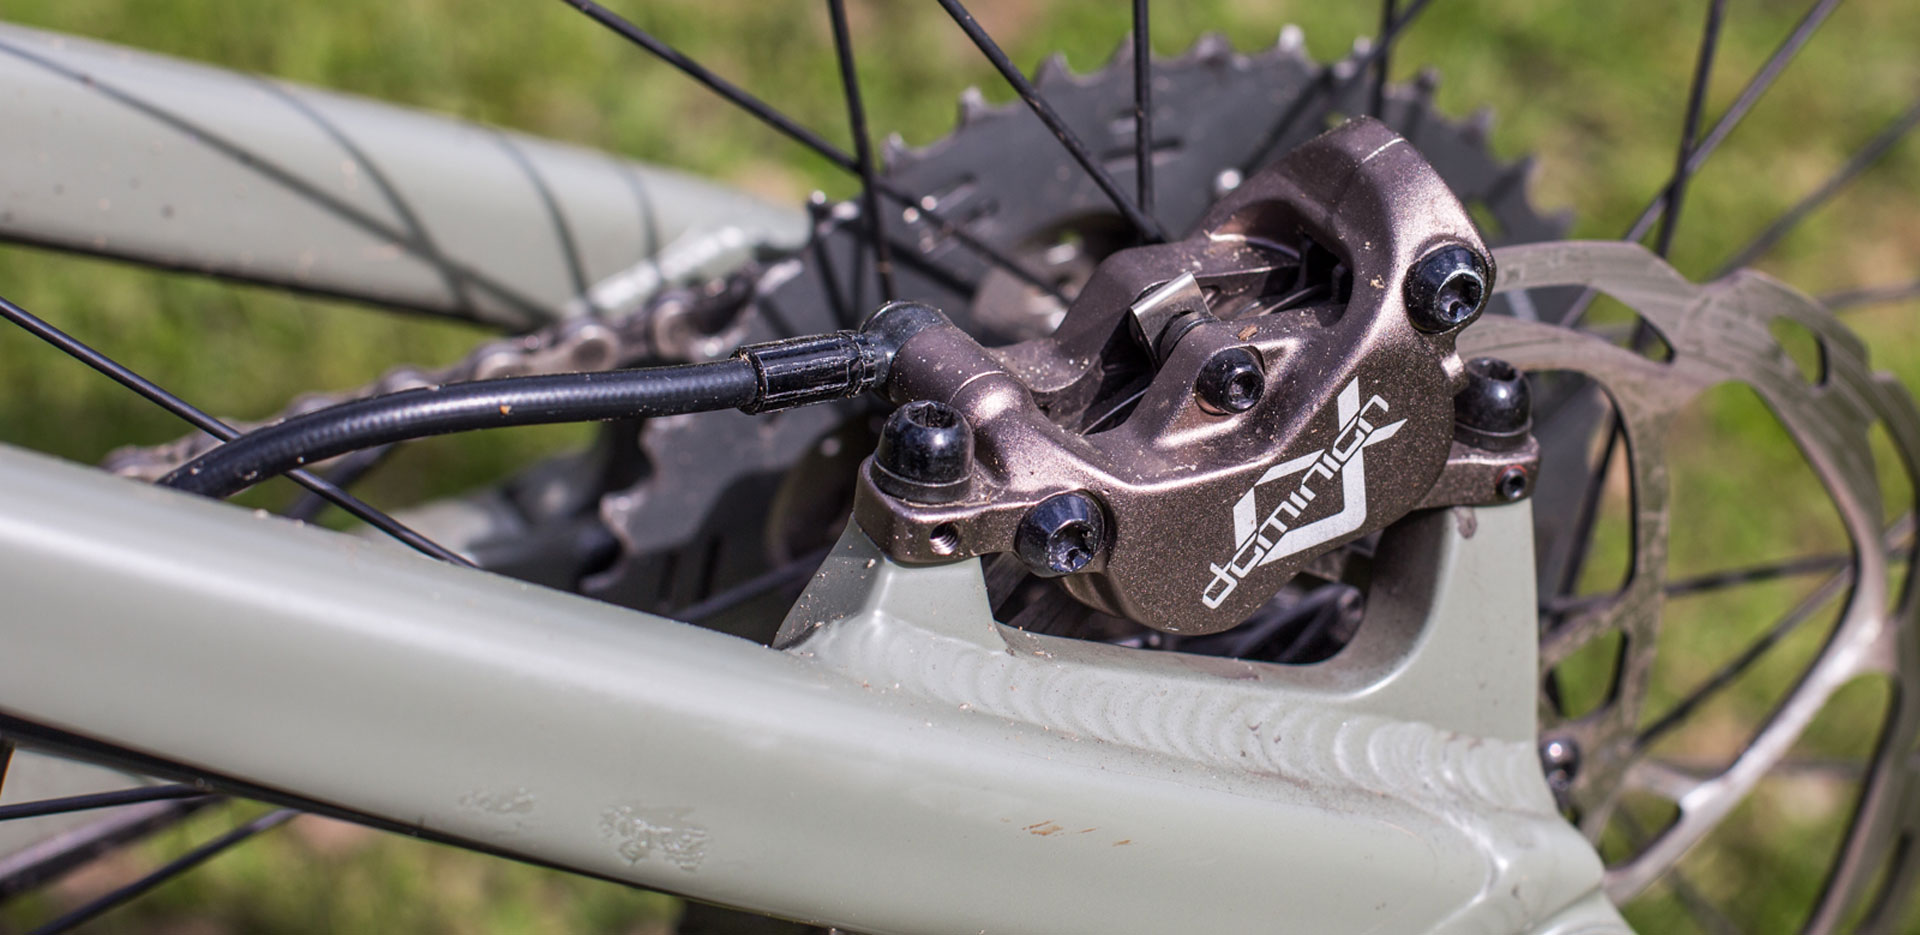 Hayes Dominion A4 Brakeset Review